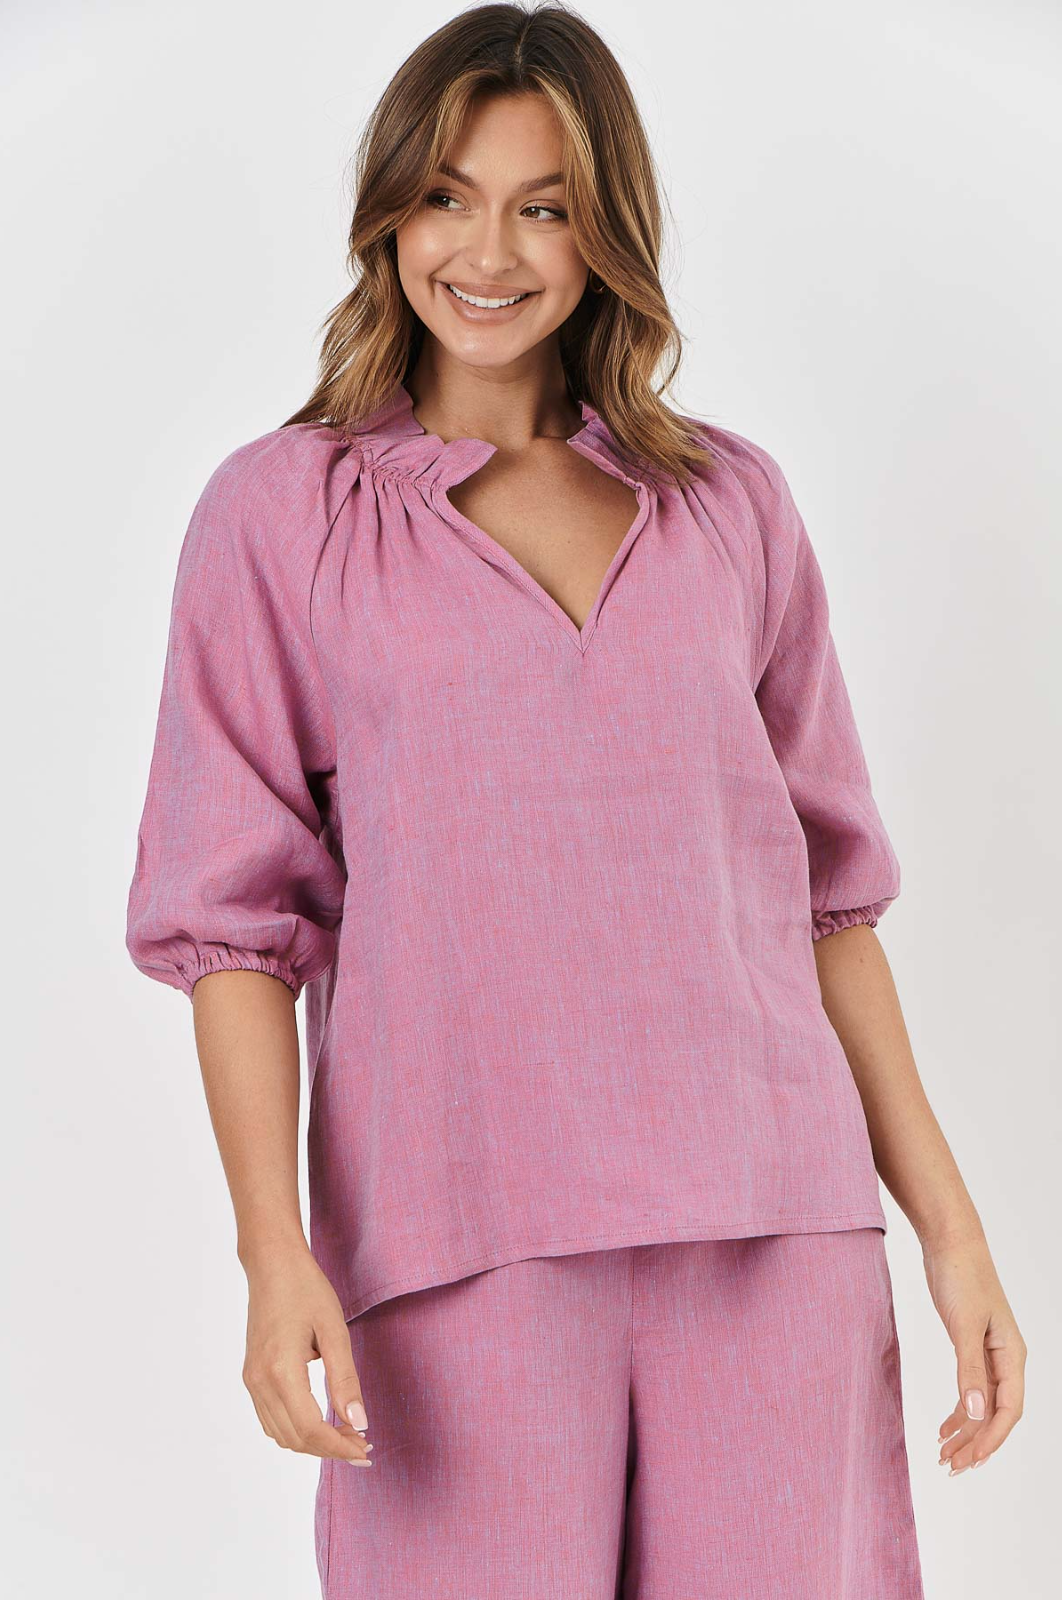 Naturals by O & J Linen Ruched V Neckline Top in Taffy